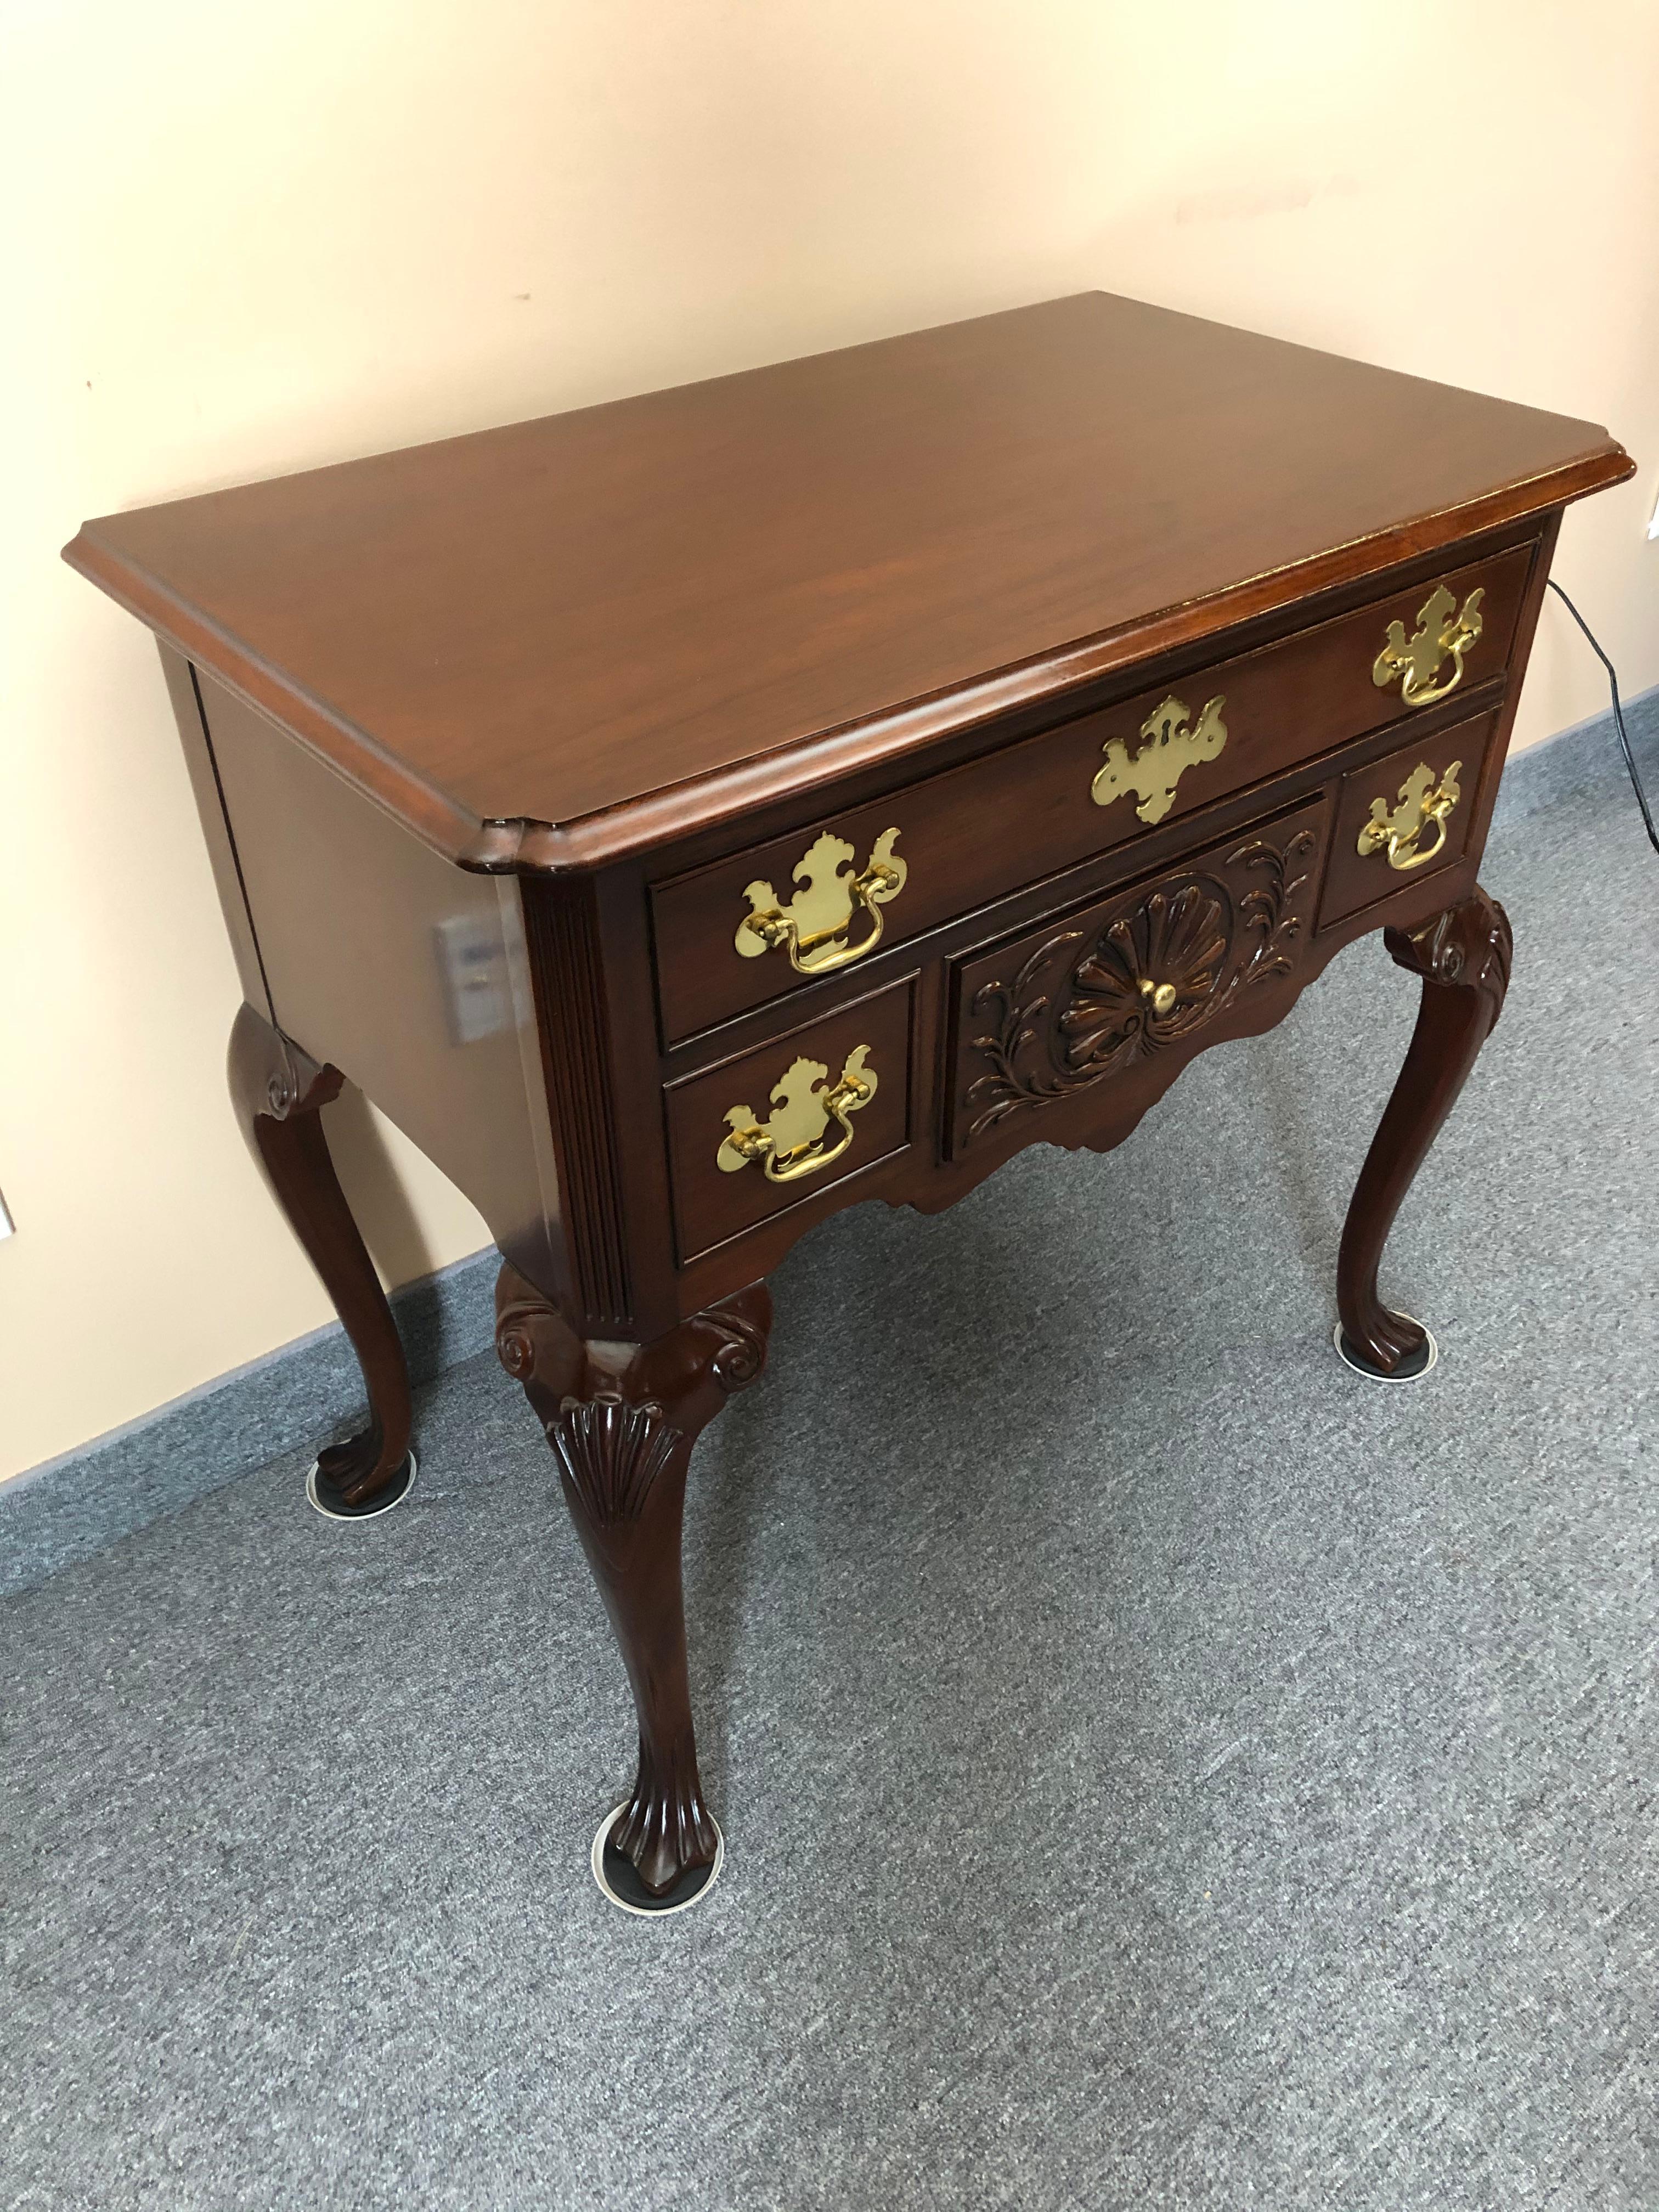 Stately Chippendale style lowboy having 3 drawers, cabriole legs with carved drape feet and classic brasses.